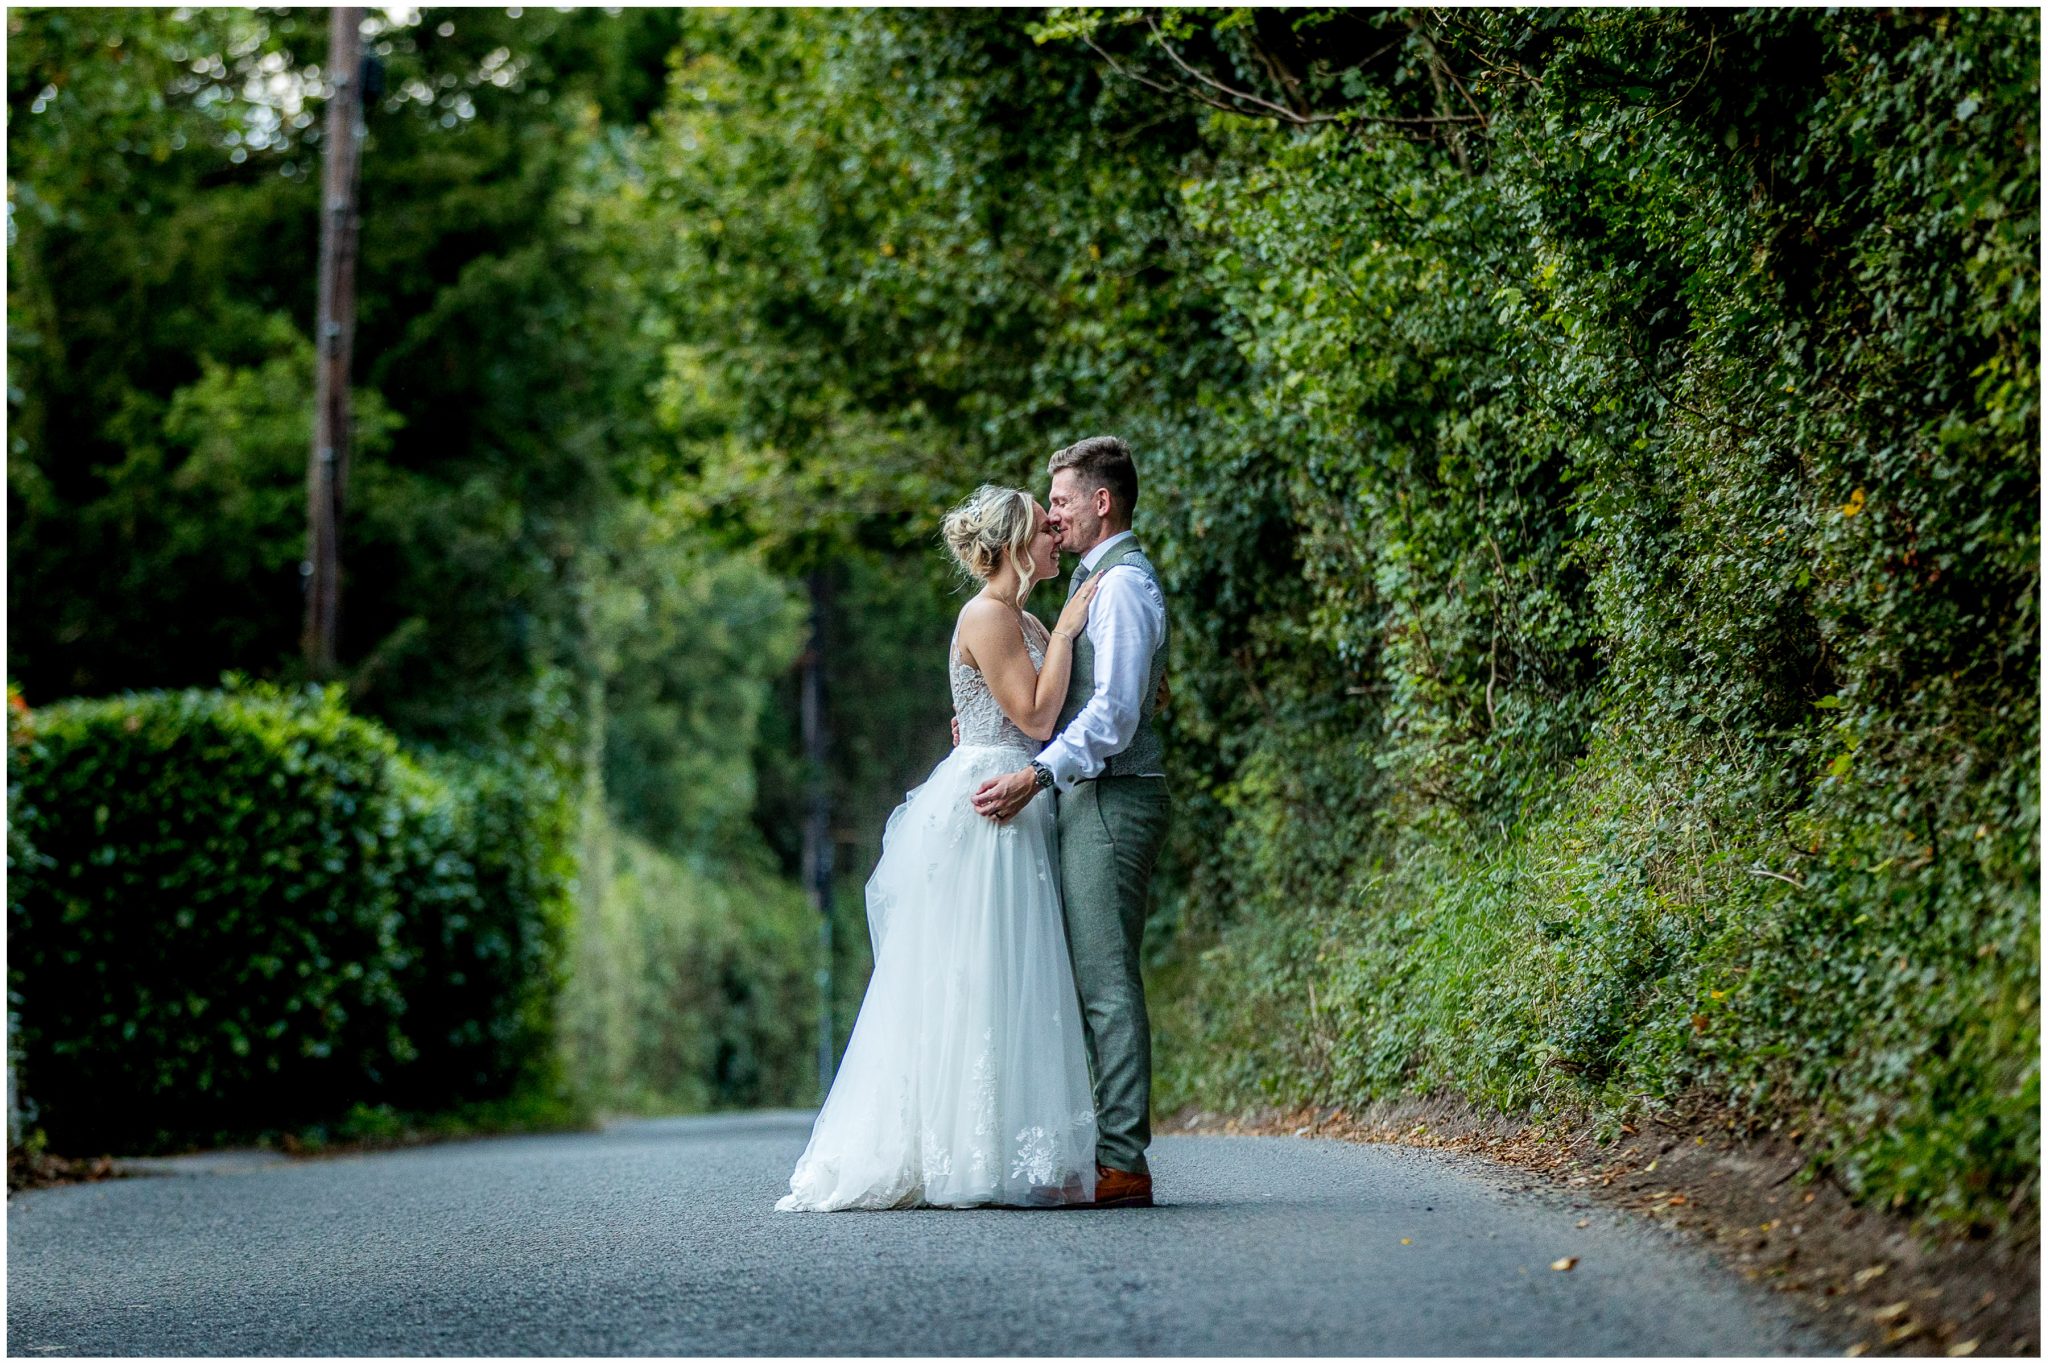 The wedding couple share a moment on a quiet country lane